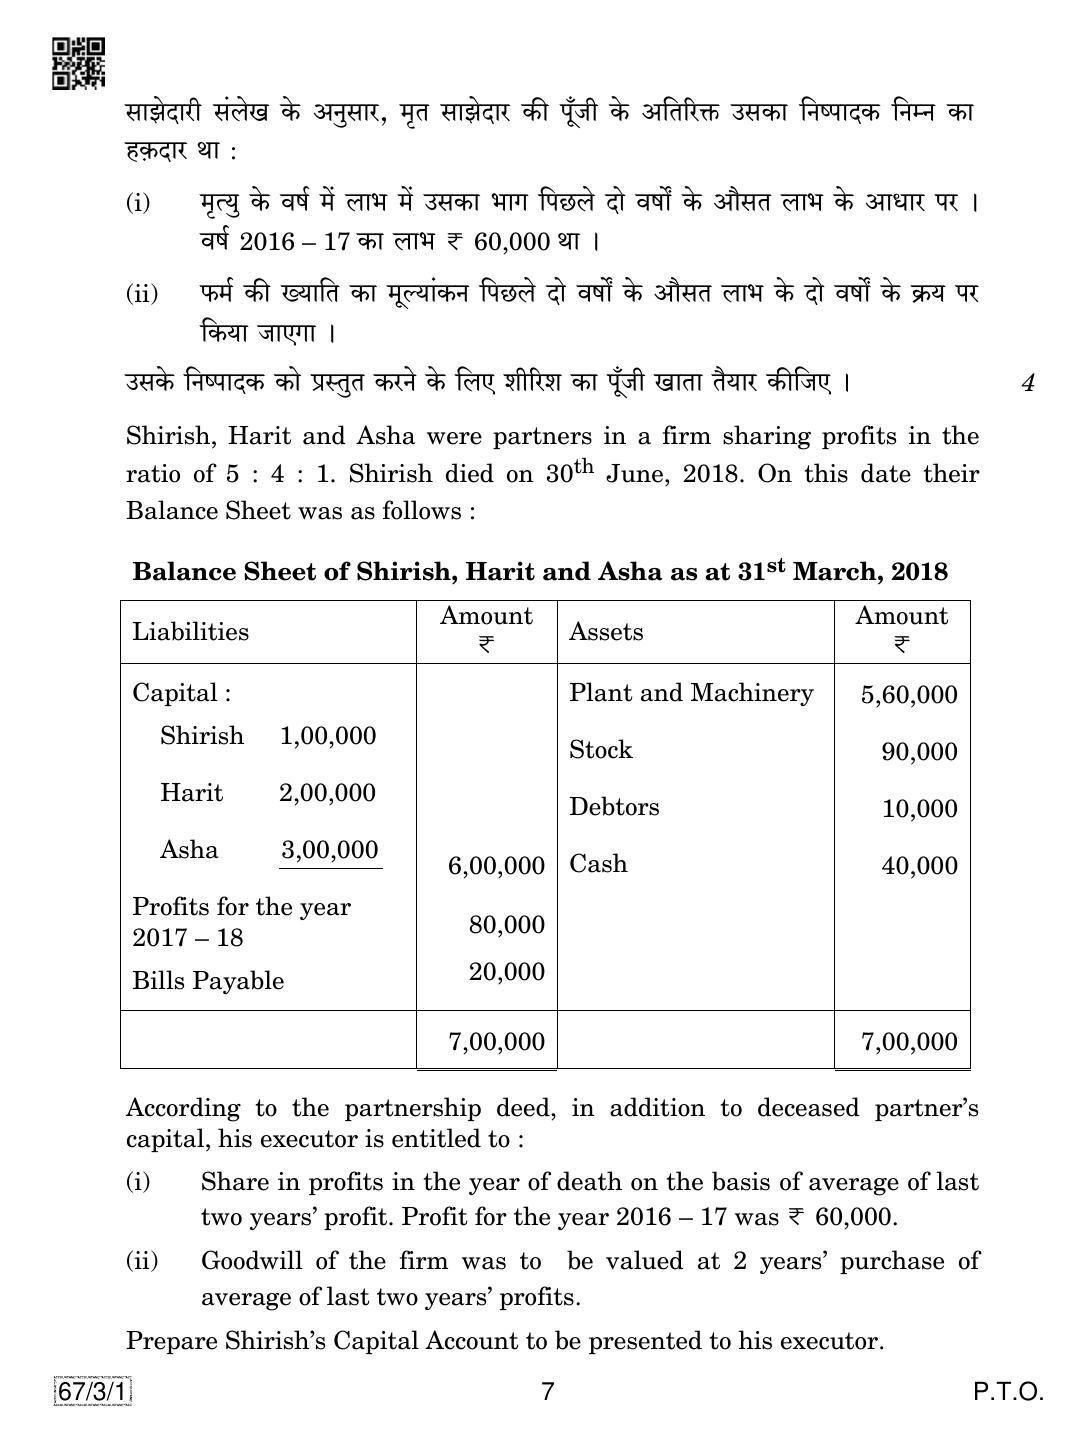 CBSE Class 12 67-3-1 Accountancy 2019 Question Paper - Page 7